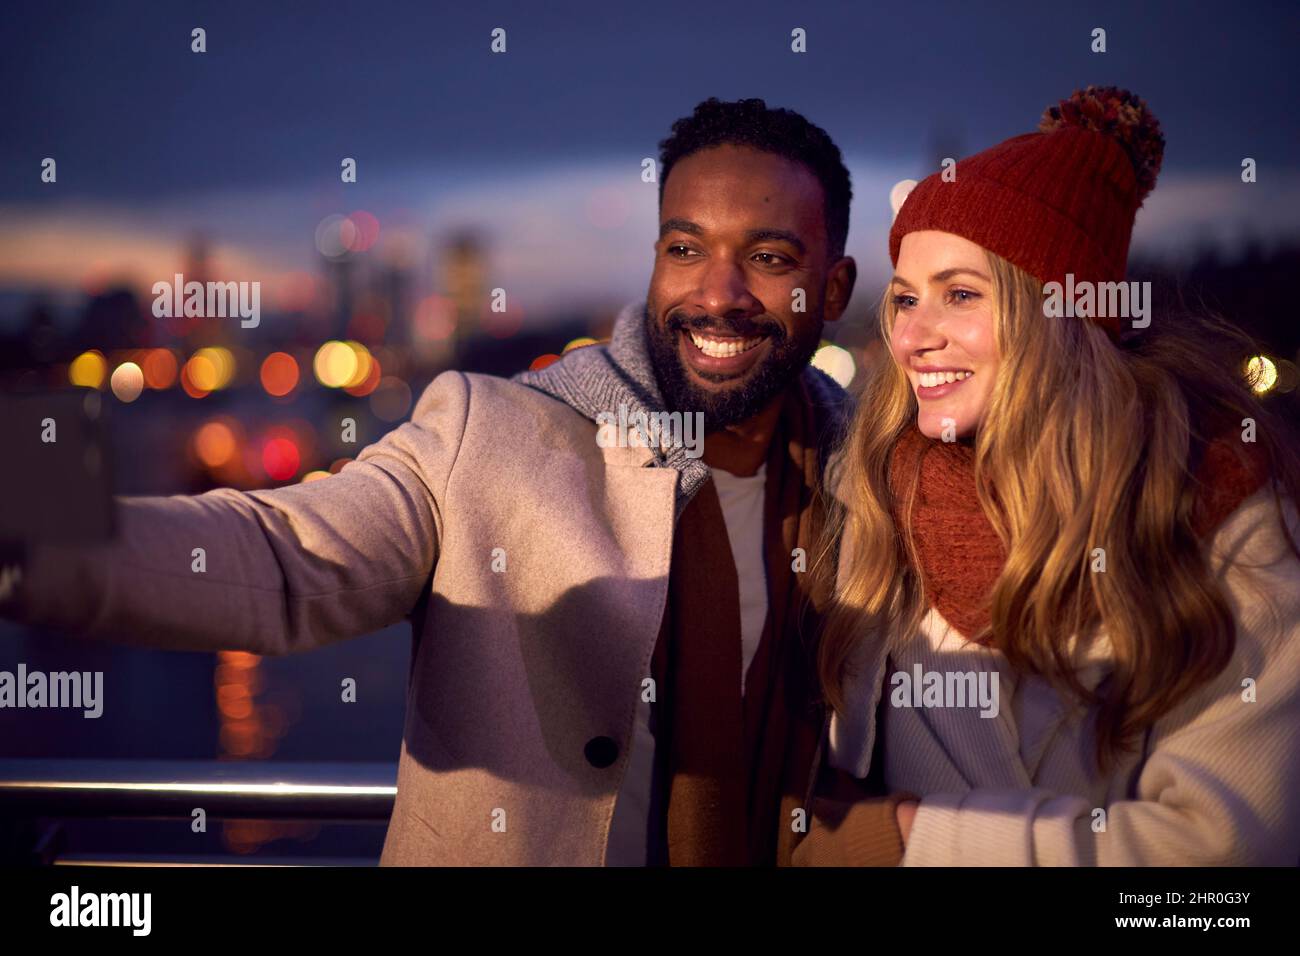 Couple Against City Lights Outdoors Wearing Coats And Scarves Posing For Selfie On Phone At Dusk Stock Photo